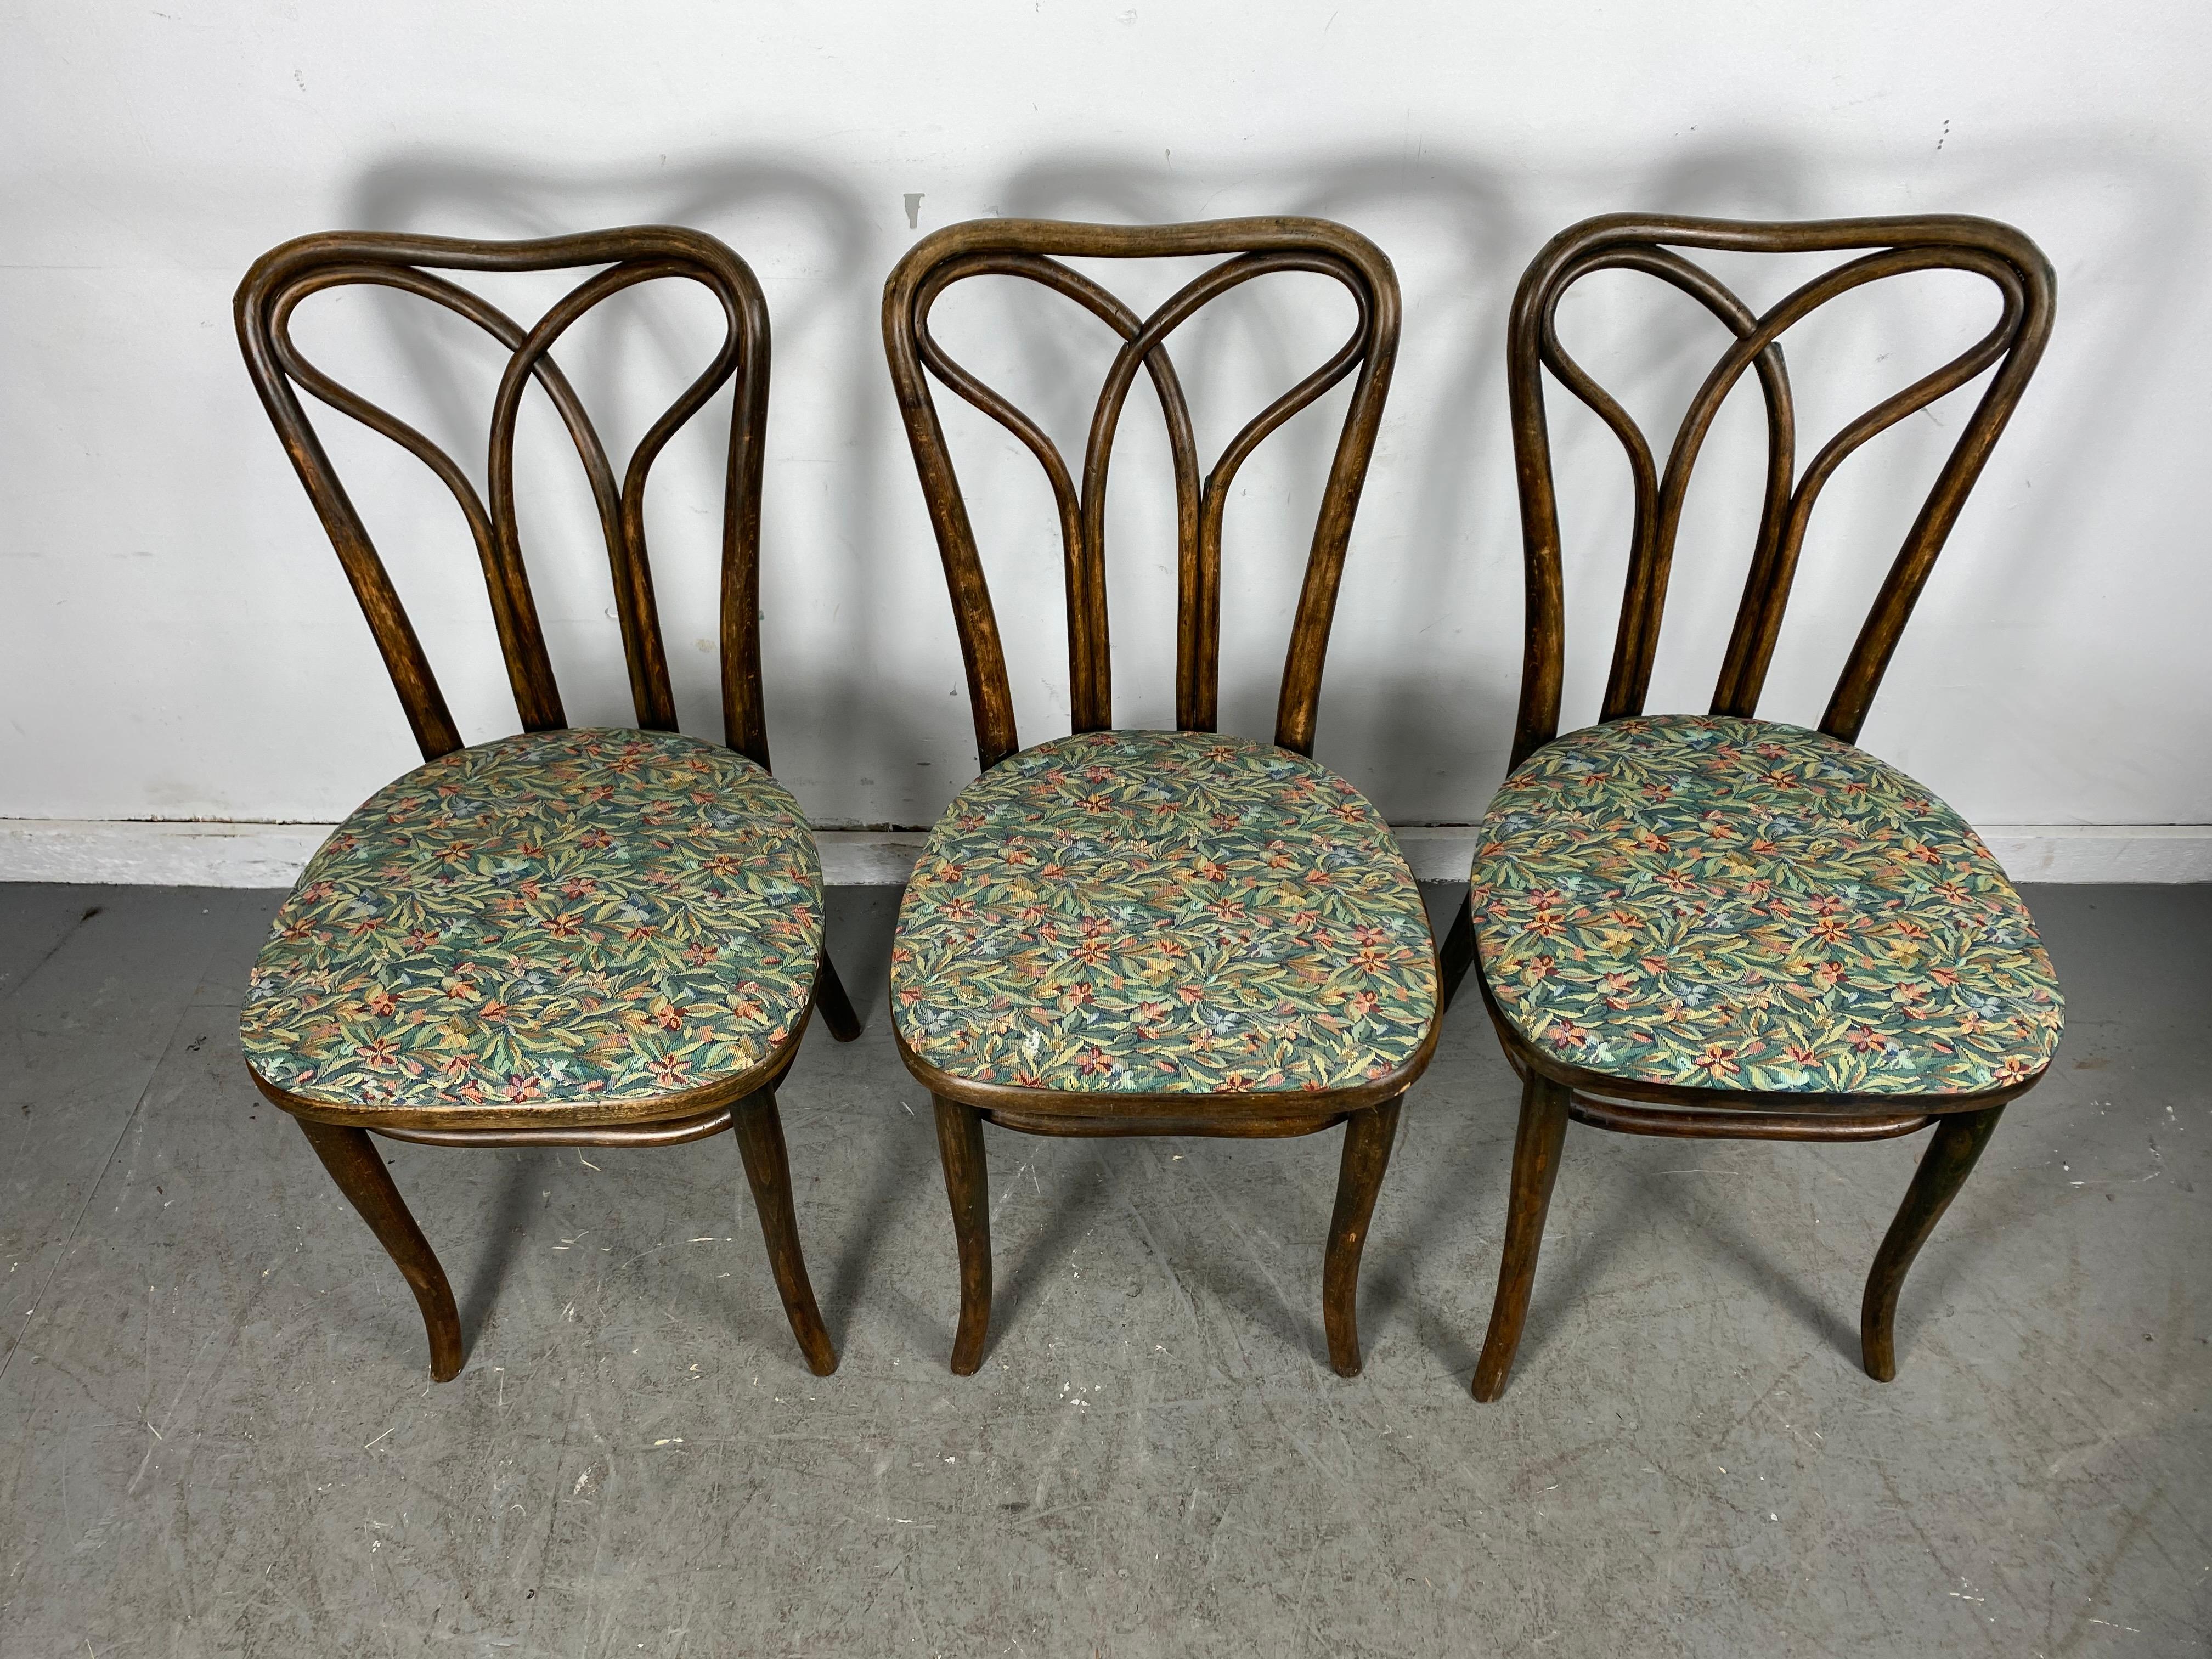 Fabric Austrian Art Nouveau Bentwood Side Chair Attributed to J & J Kohn, Early 1900's For Sale